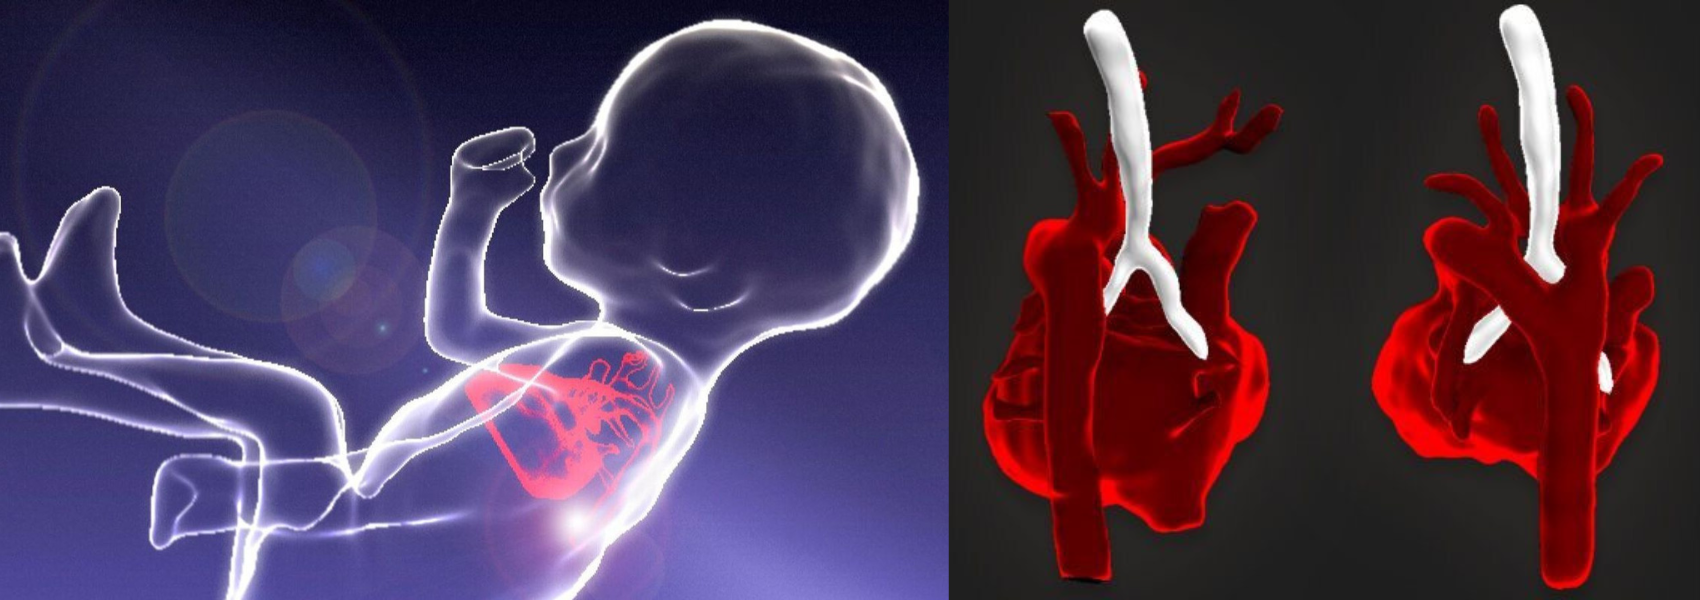 Revolutionary technology produces three-dimensional fetal cardiac images of the heart before birth